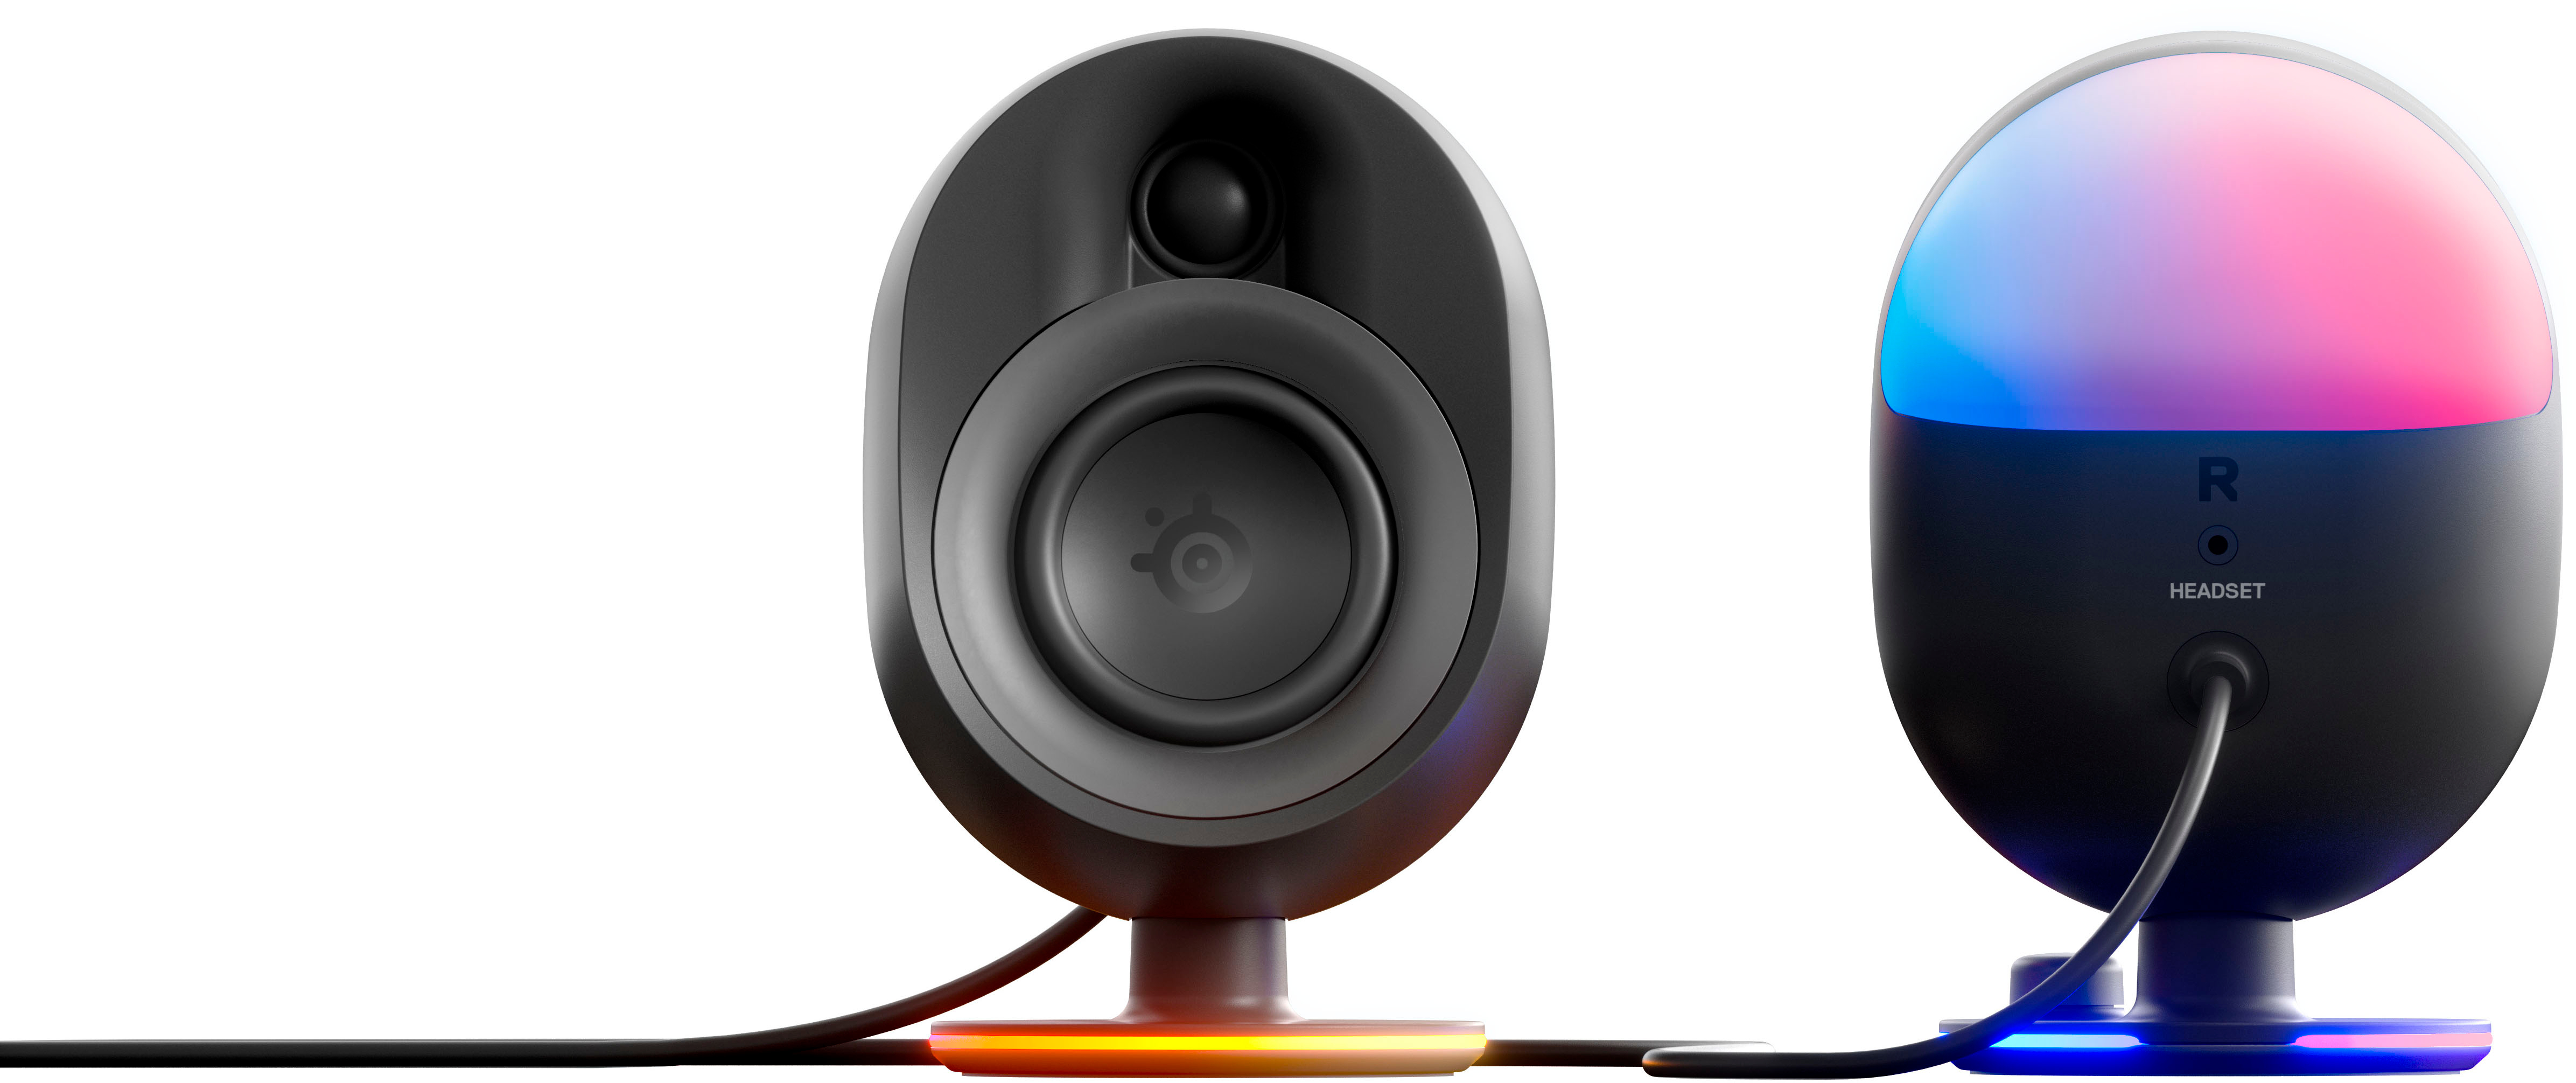 Angle View: SteelSeries - Arena 7 2.1 Bluetooth Gaming Speakers with RGB Lighting (3 Piece) - Black